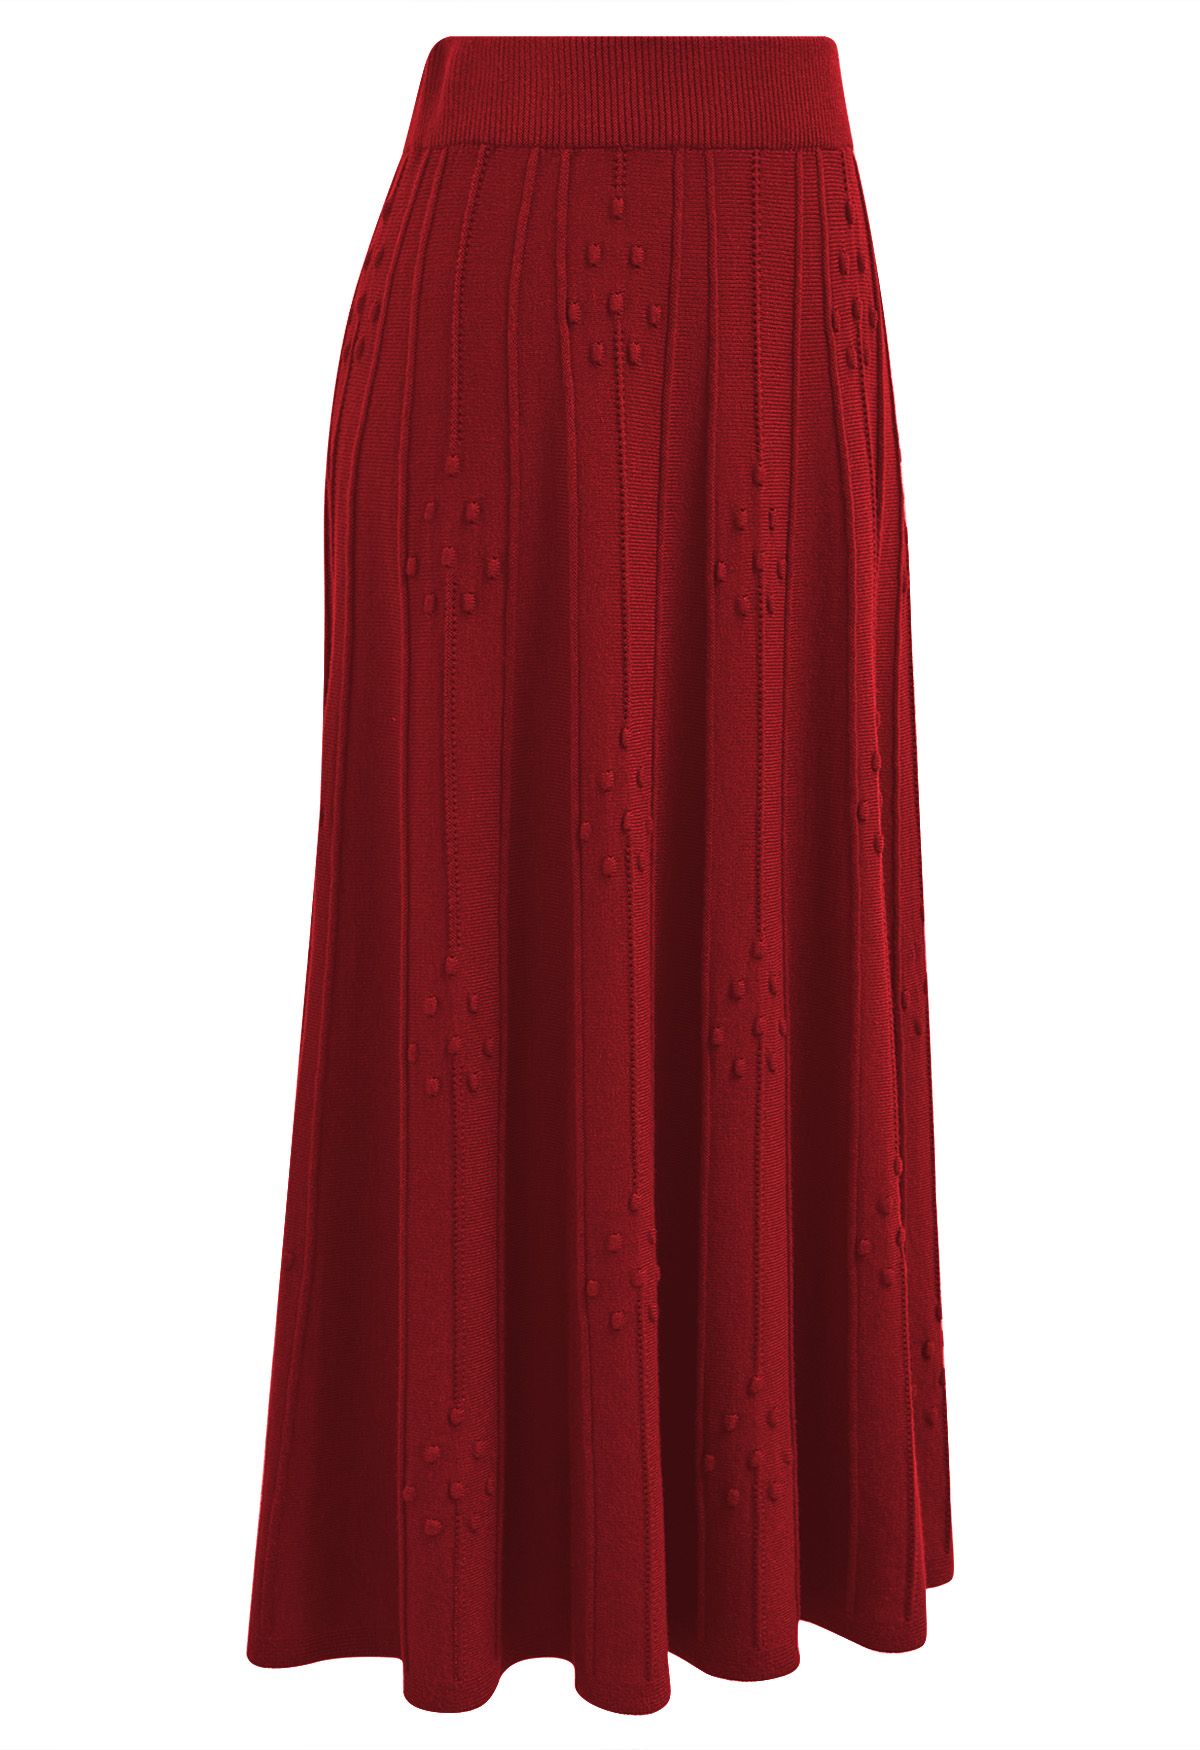 Embossed Dots Seam Knit Midi Skirt in Red